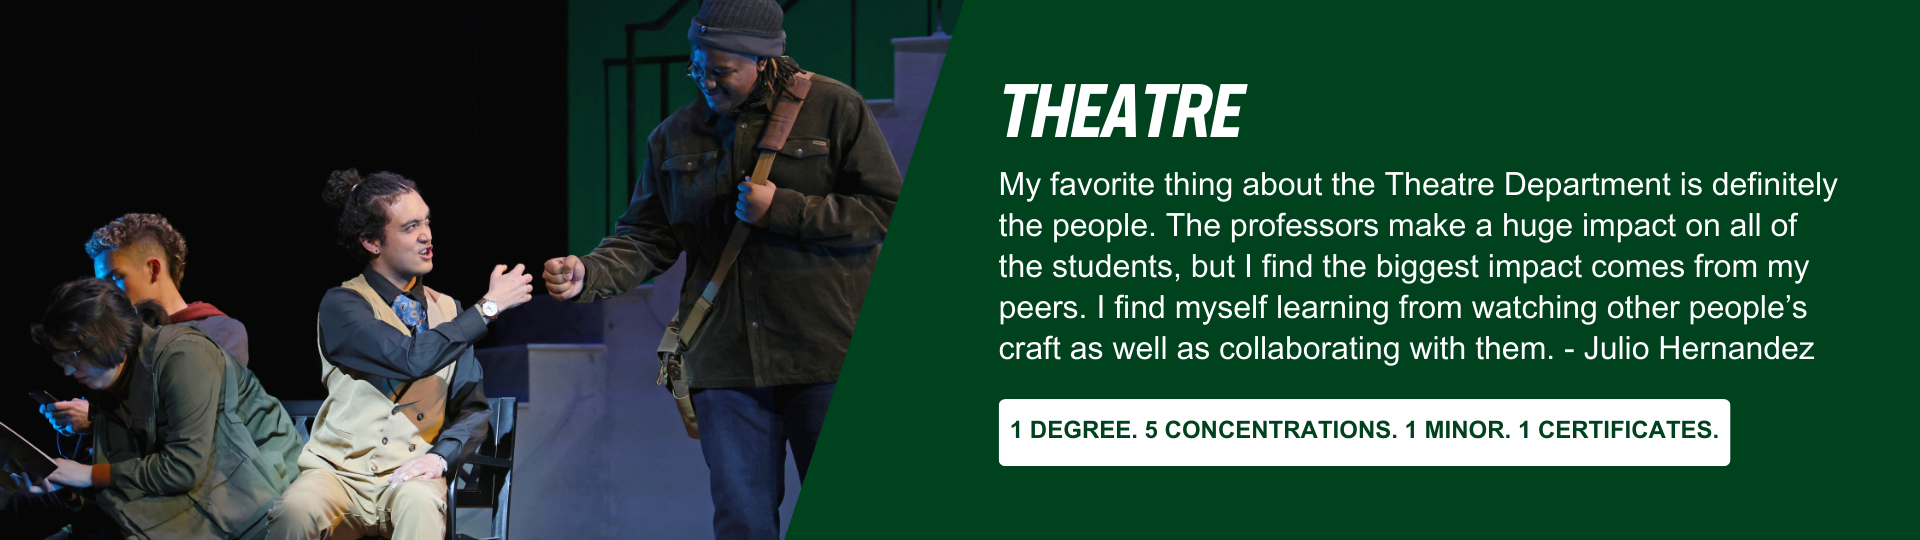 Department of Theatre banner: 1 degree. 5 concentrations. 1 minor. 1 certificate.